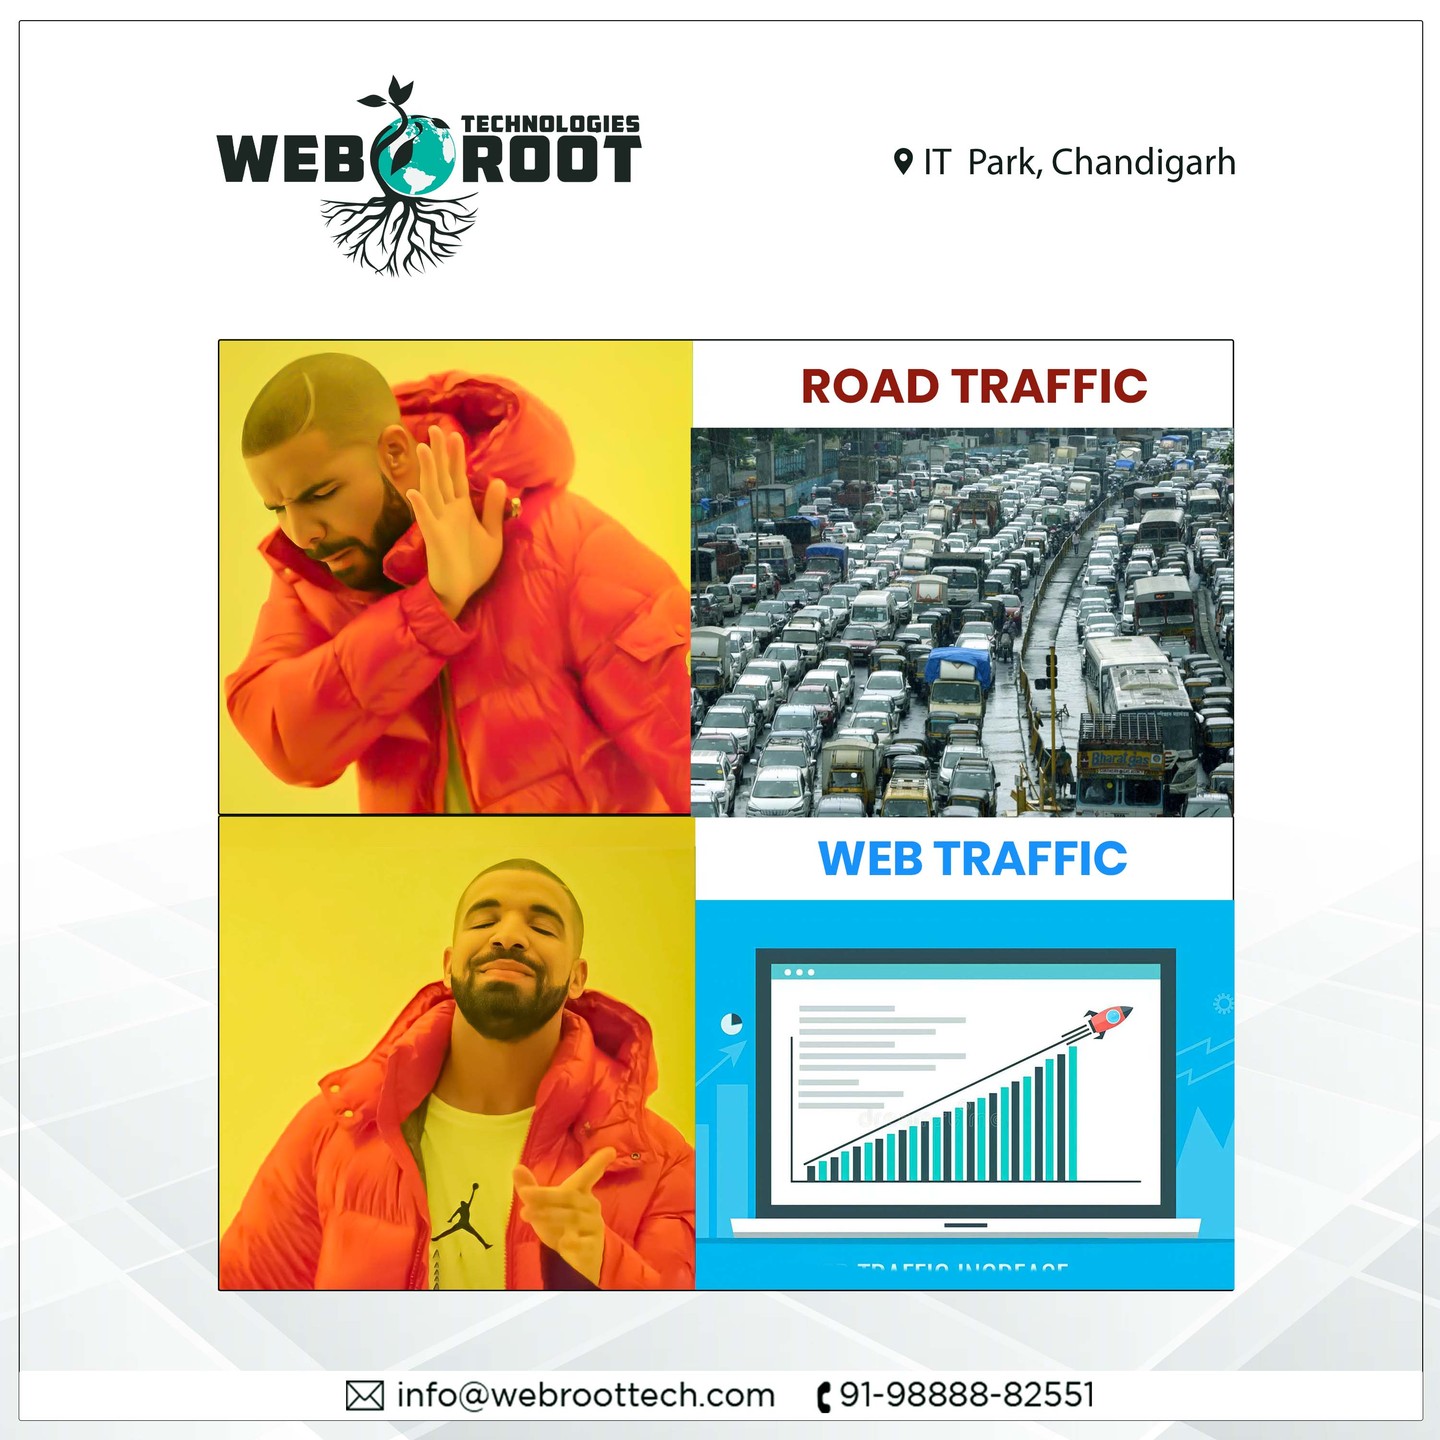 Nobody loves the traffic on the road unless it is website traffic.

Traffic congestion presents problems and difficulties that might ruin your day, but website traffic always brings opportunities to boost sales and conversion rates.

Get A Quote Today!
📞: +91-9888882551
📧: info@webroottech.com
🌐: https://webroottech.com

#website #websites #websitedesign #websitetips #websitetraffic #websitedevelopment #trendingmeme #seomemes #usefulwebsites#seo #digitalmarketing #digitalnetworkmarketing #digitalmediamarketing #digitalmarketingmeme #searchengineoptimization #searchengine #searchoptimization#websitetraffic #ideascreativas #businessideas #marketingidea